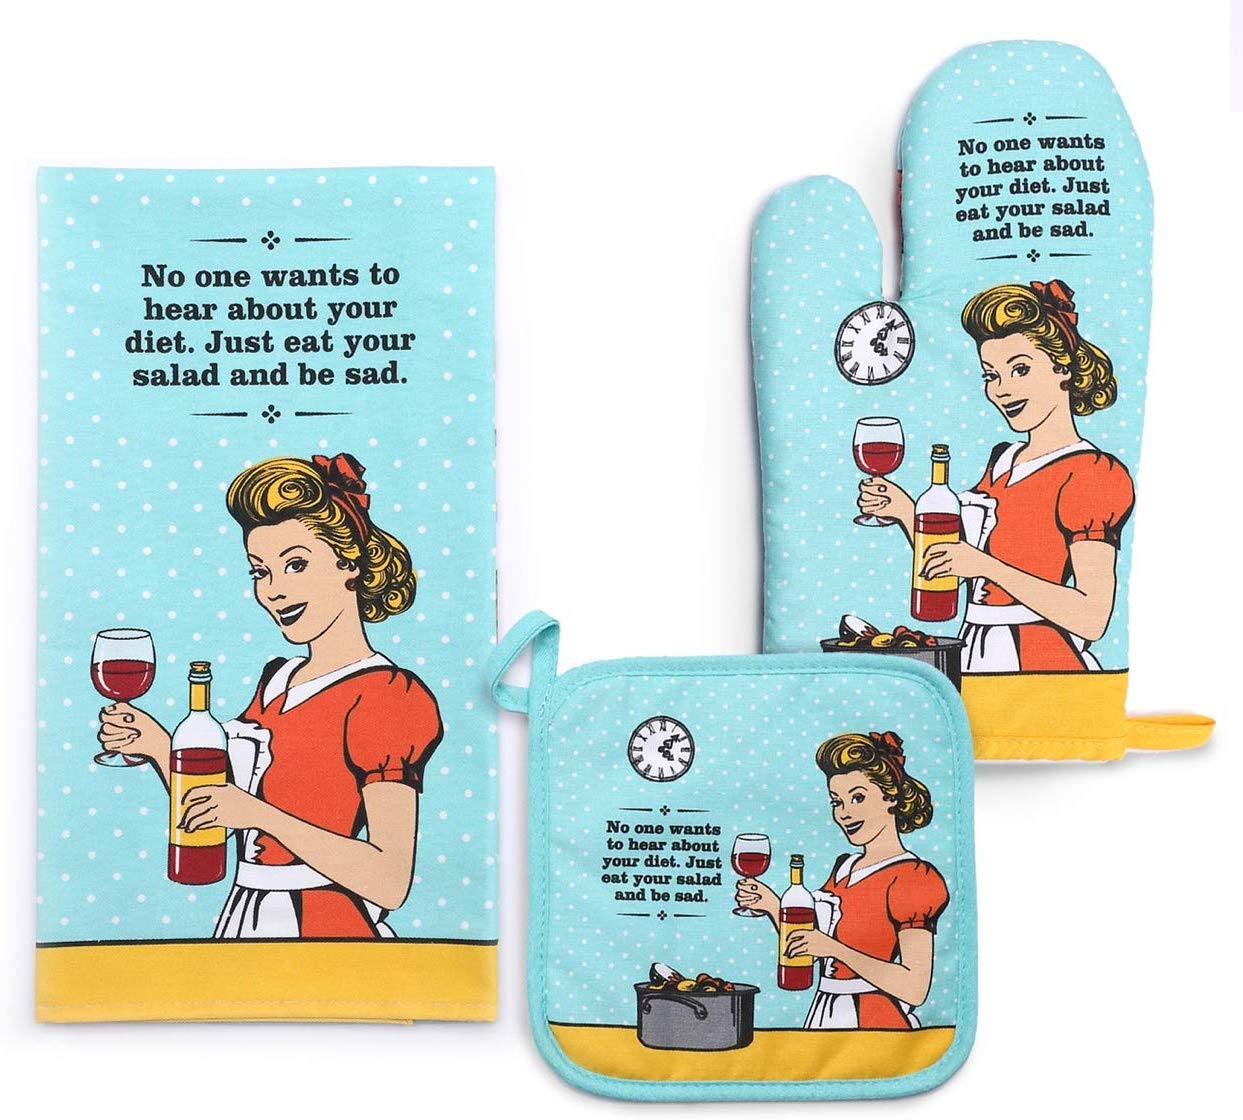 Oven Mitt & Pot Holder Set – Cosy House Collection